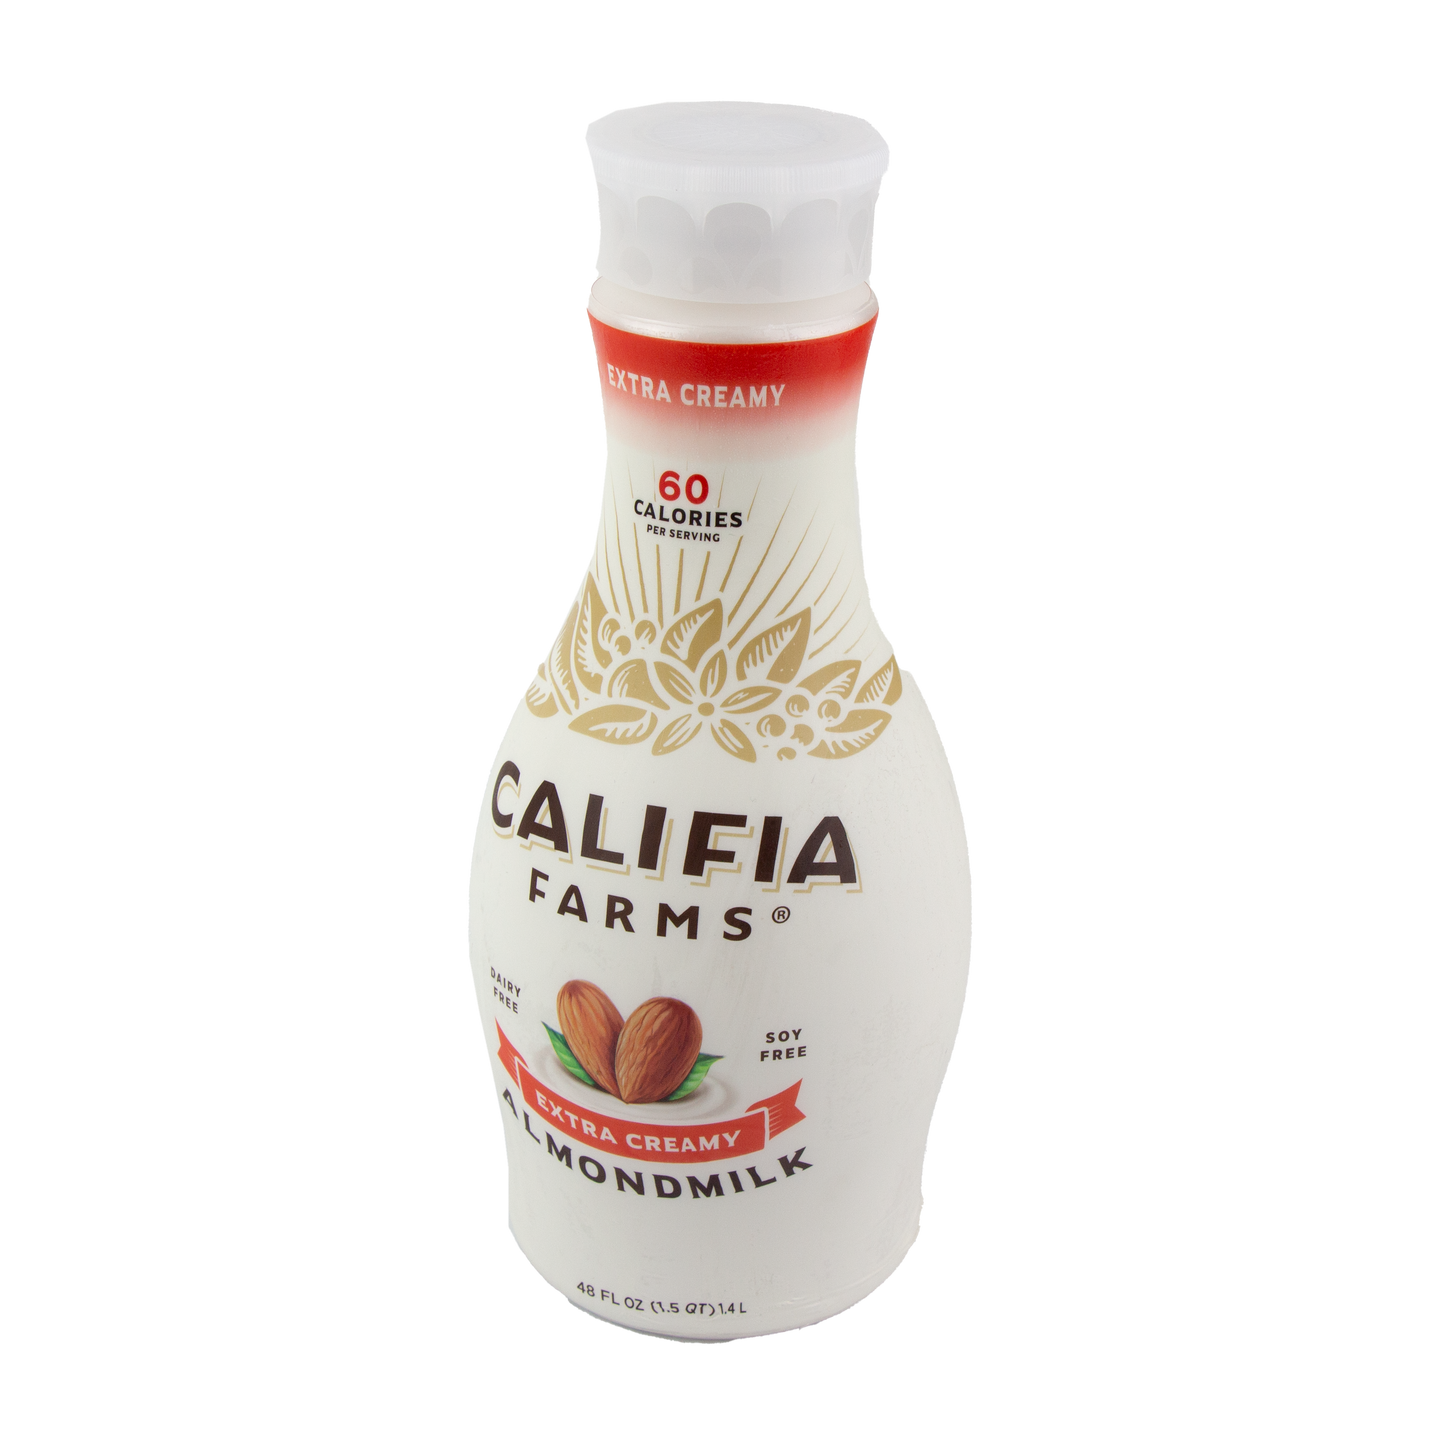 Califia Farms - Almond Milk Extra Creamy (Store Pick-Up Only)